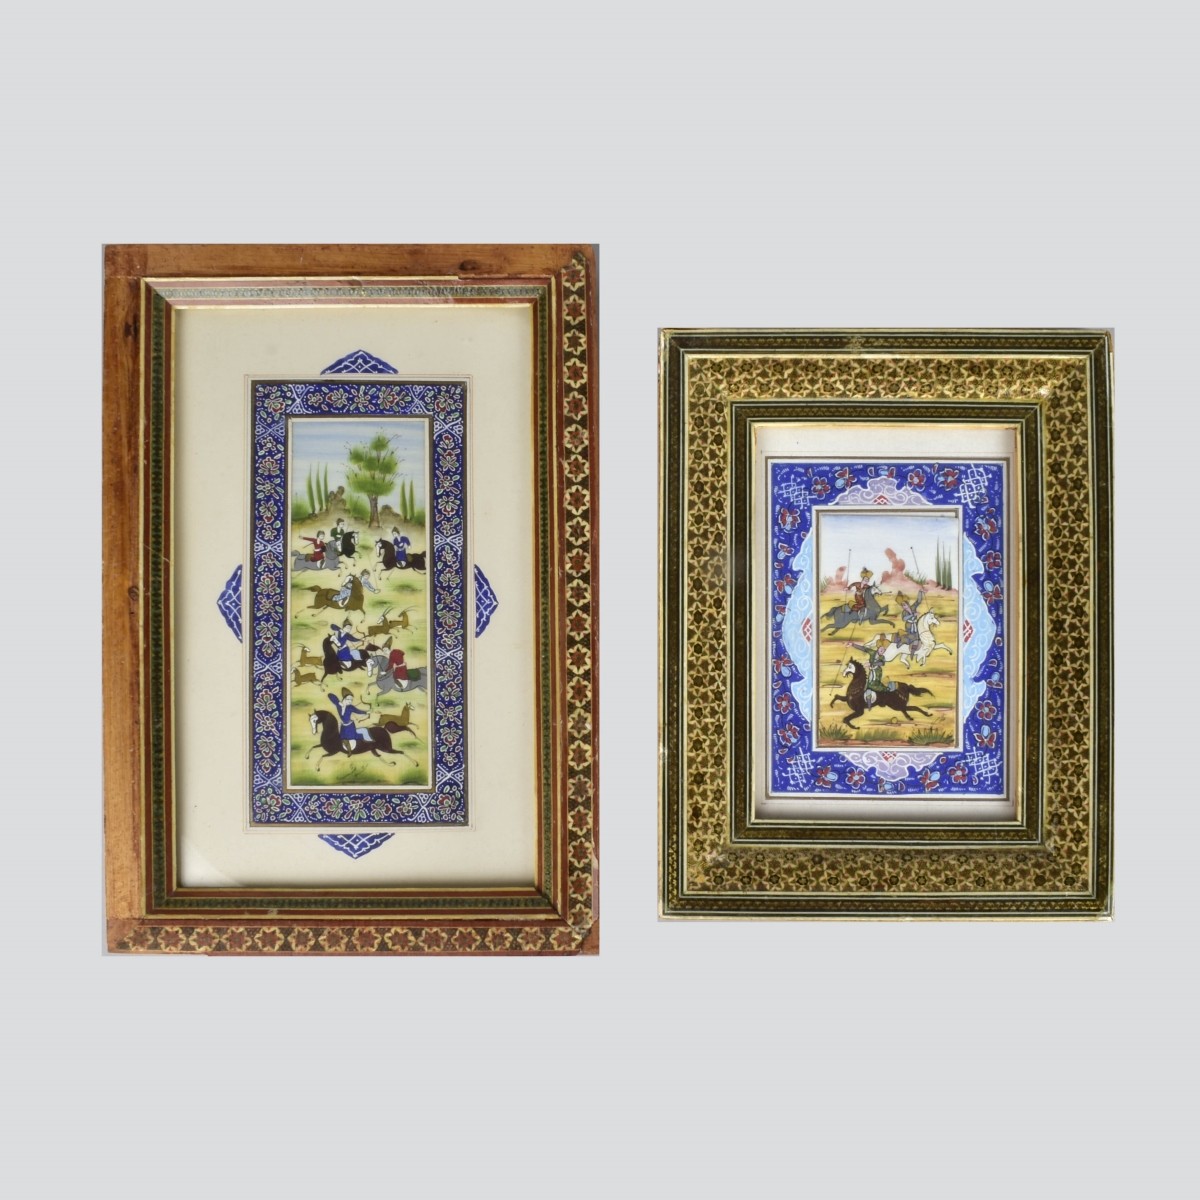 Two Persian Miniature Celluloid Paintings